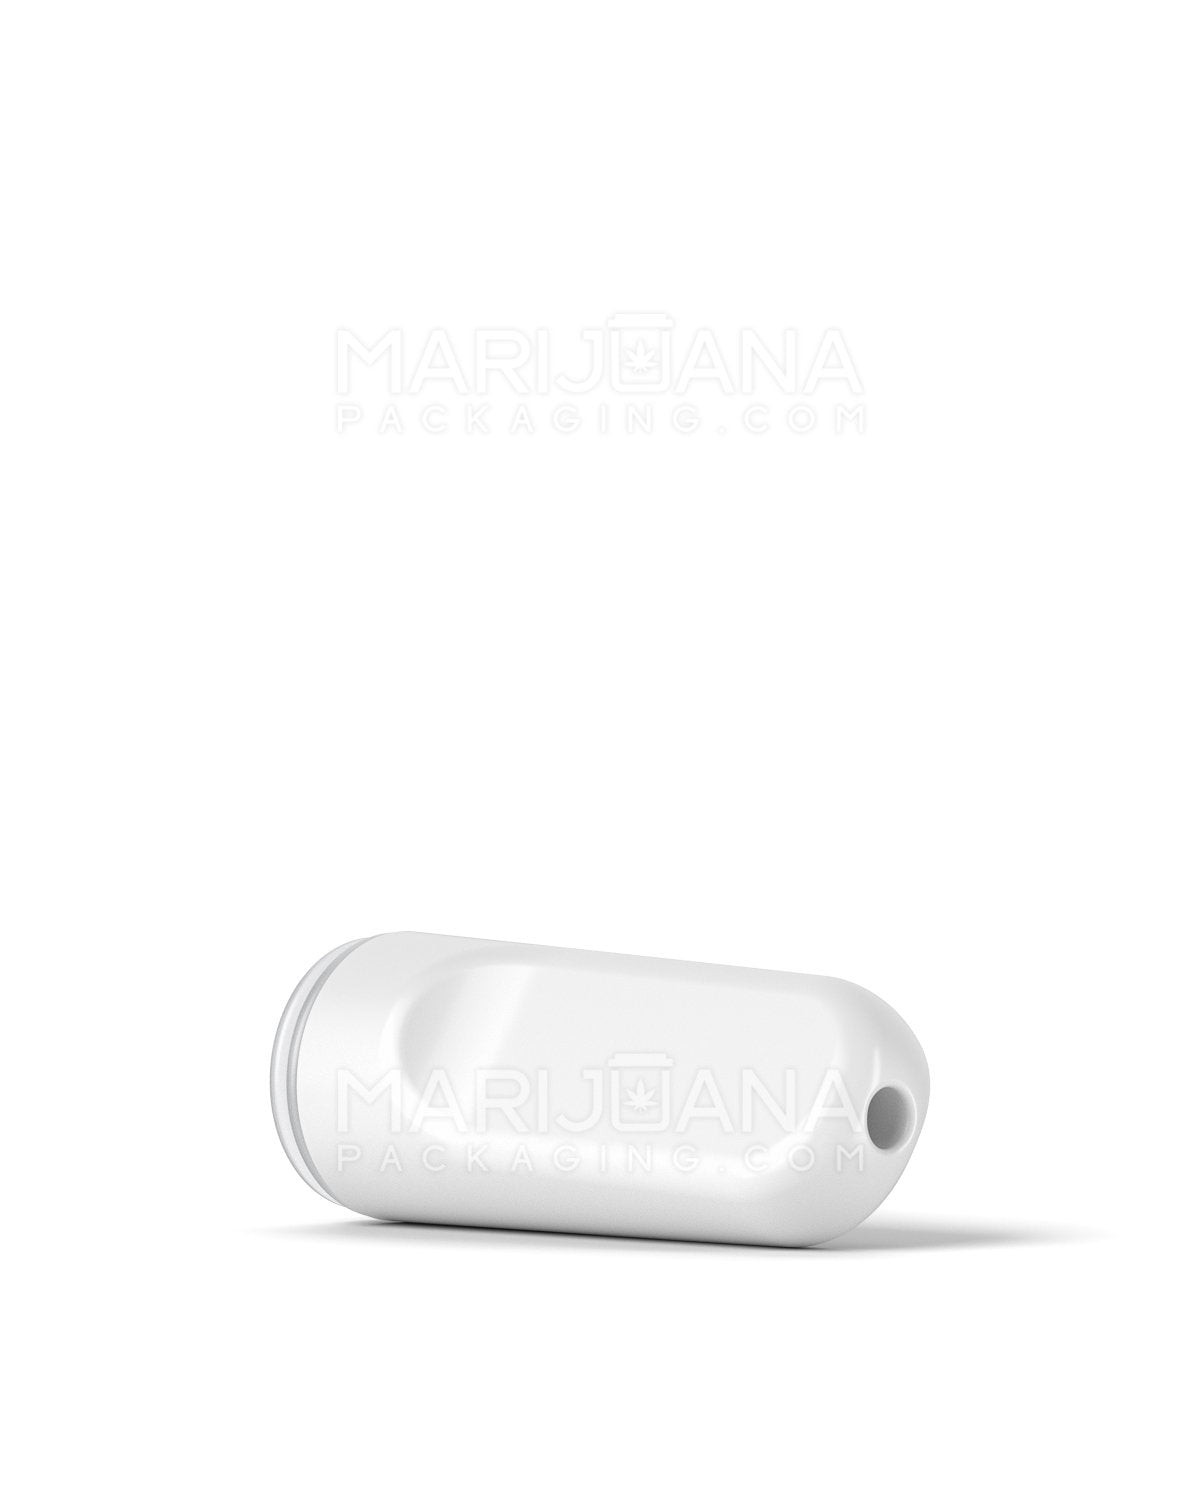 AVD | Flat Vape Mouthpiece for GoodCarts Glass Cartridges | White Ceramic - Screw On - 600 Count - 5